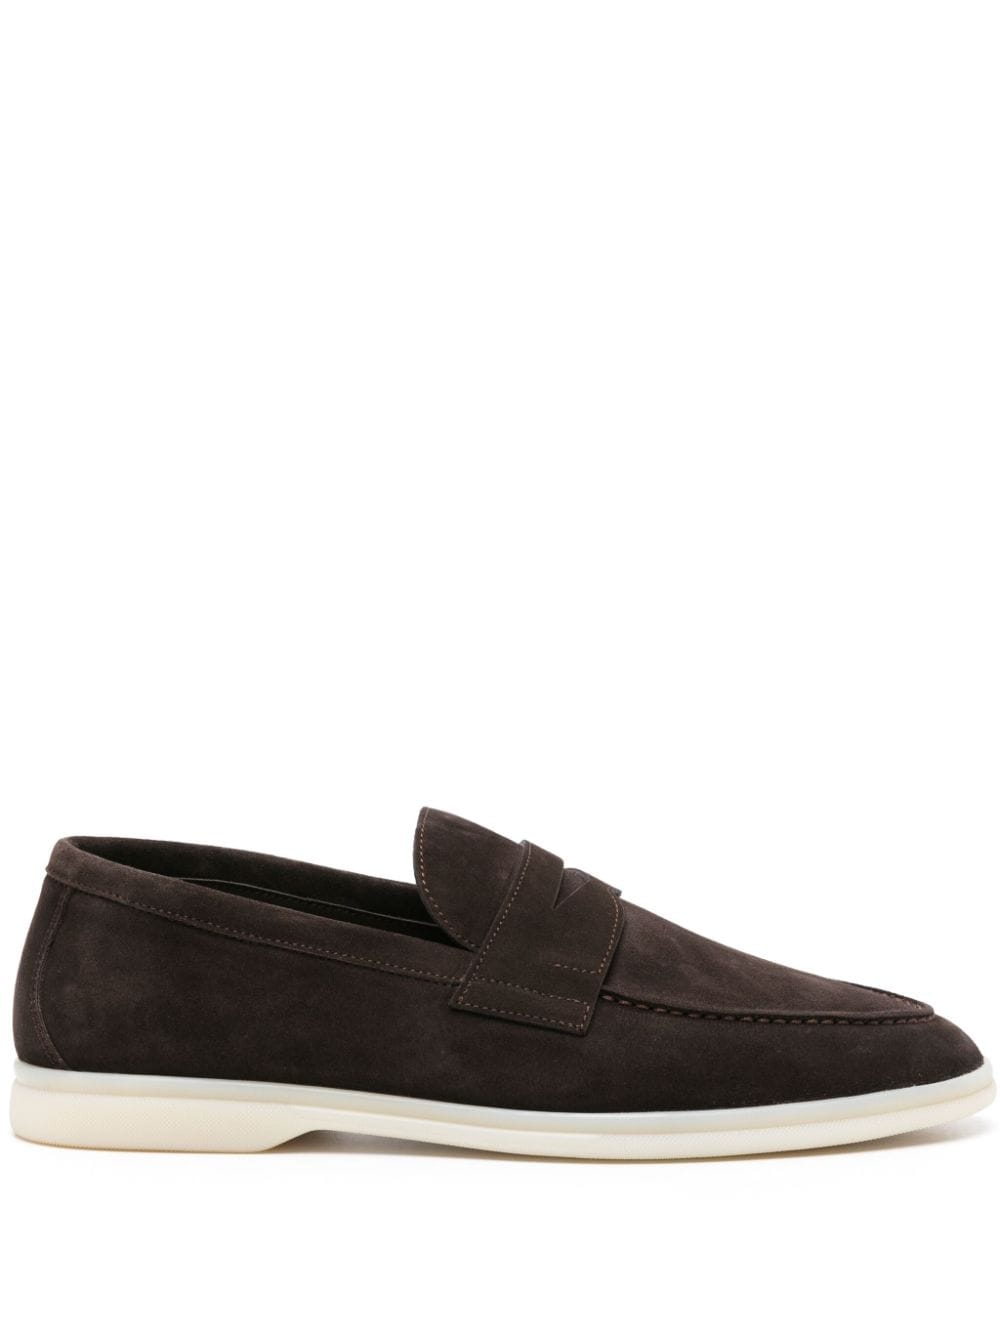 SCAROSSO LUCIANO SUEDE LOAFERS